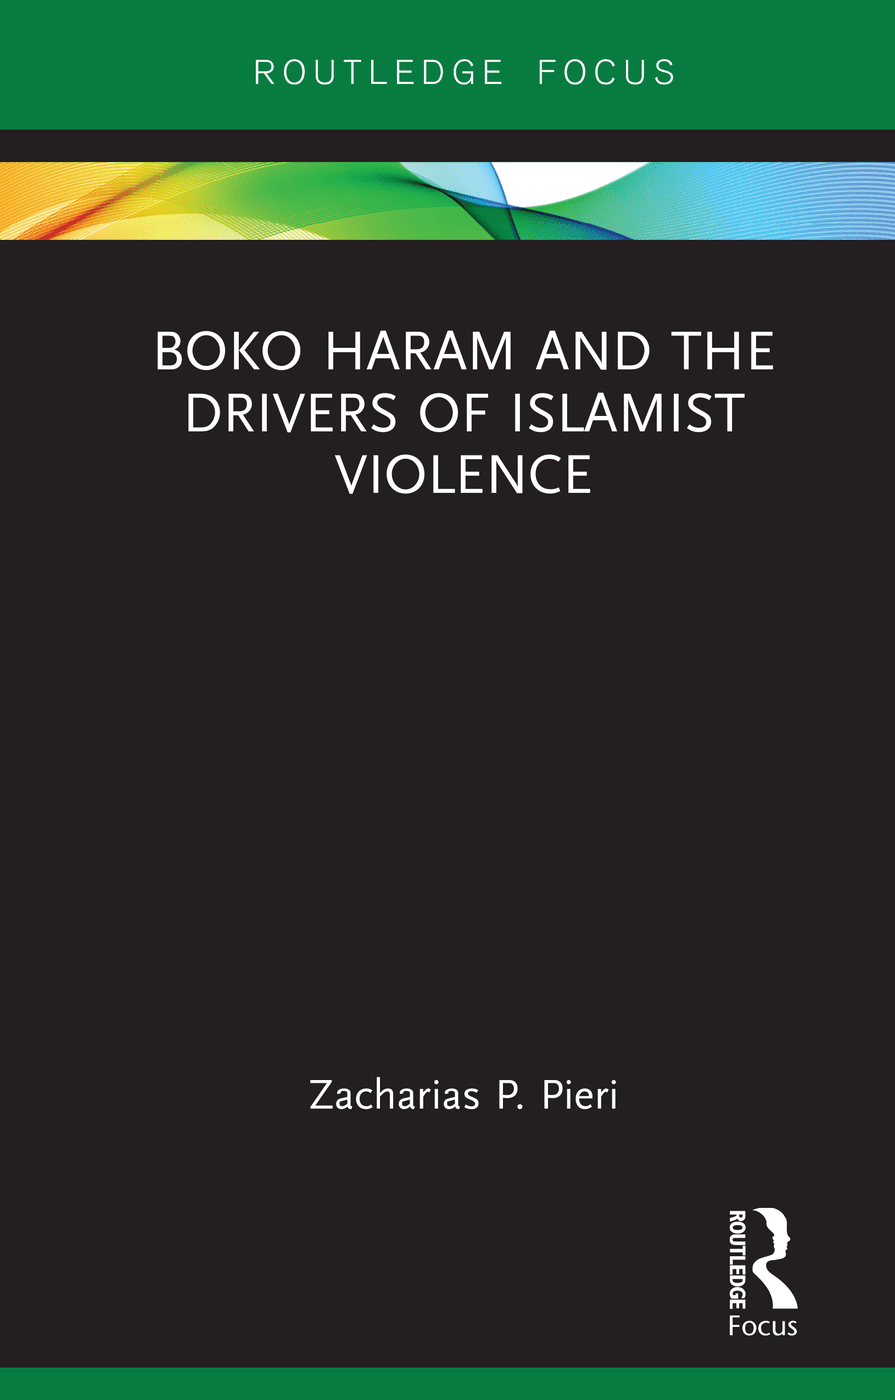 Boko Haram and the Drivers of Islamist Violence by Zacharias P. Pieri